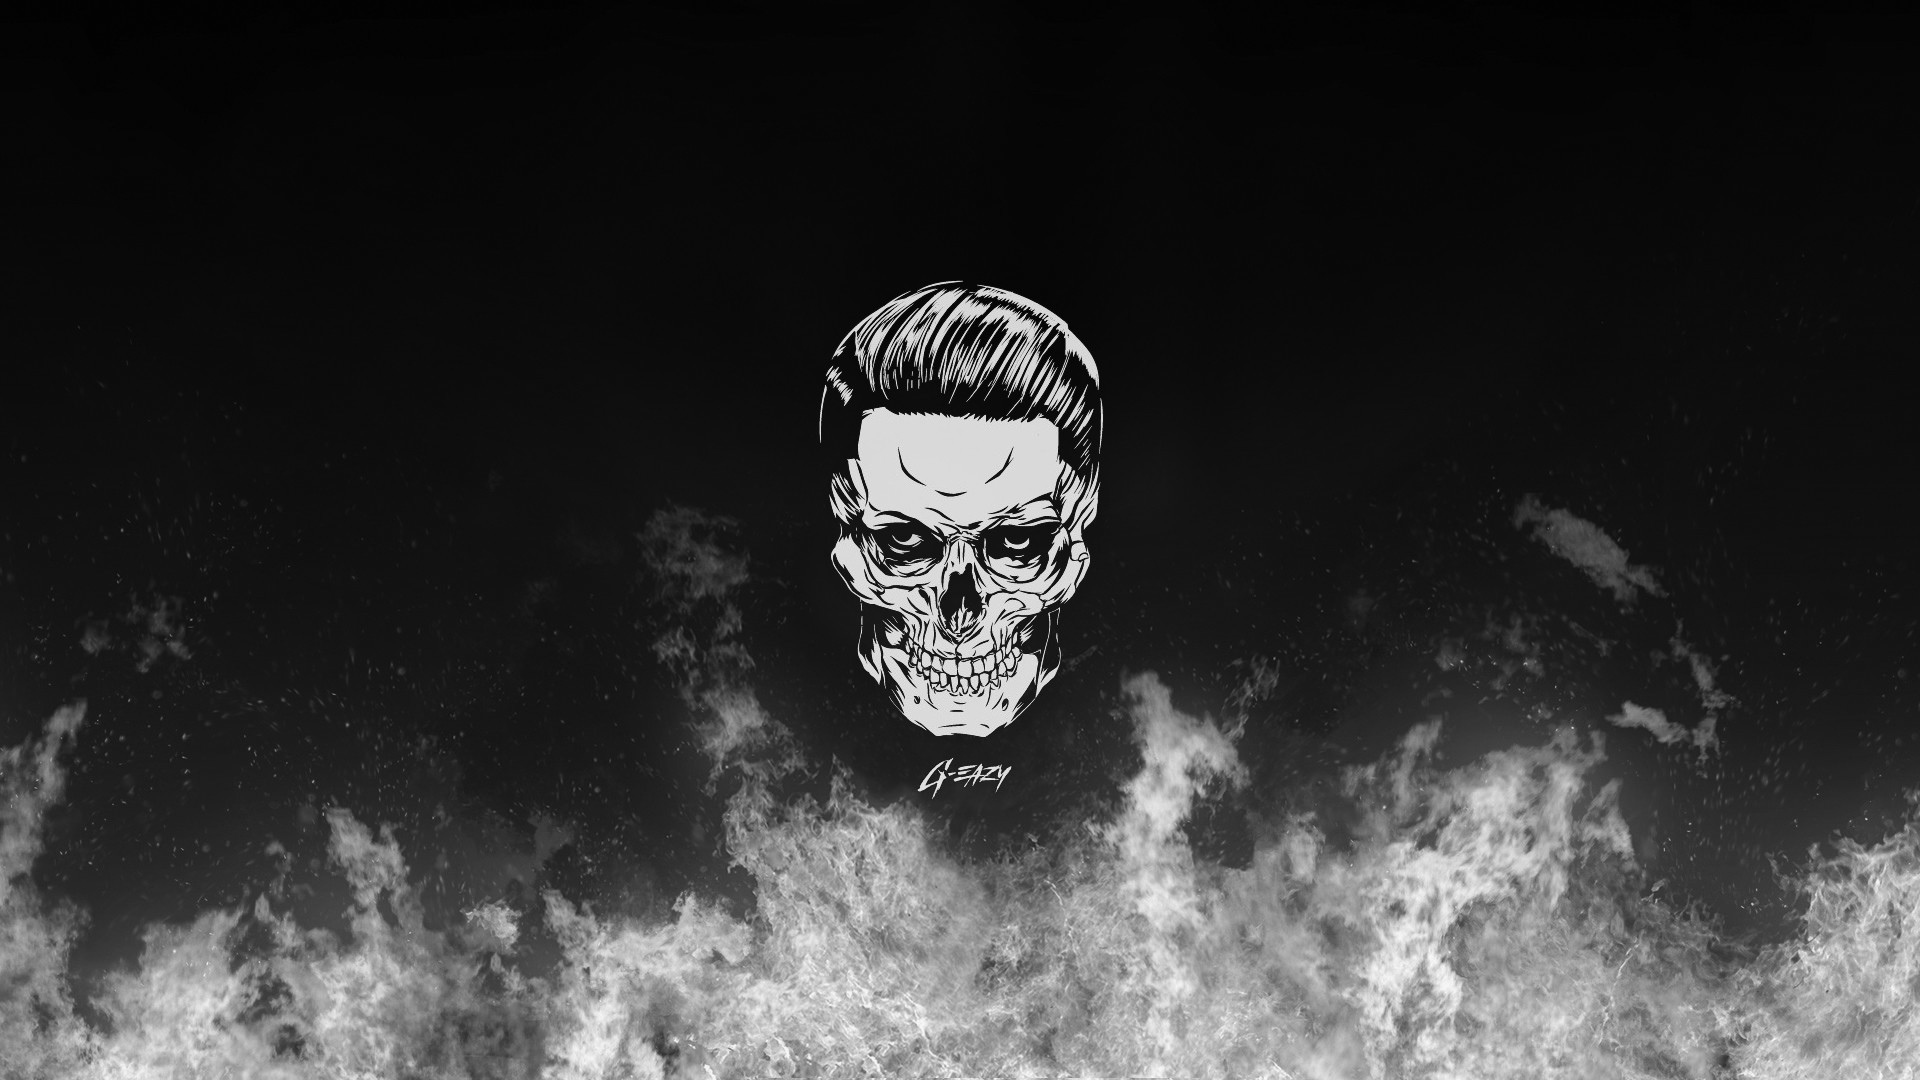 1920x1080  Best wallpaper gallery with G-eazy Skull and HD wallpapers. We  collected full High Quality pictures and wallpapers for your PC, Mac and ...